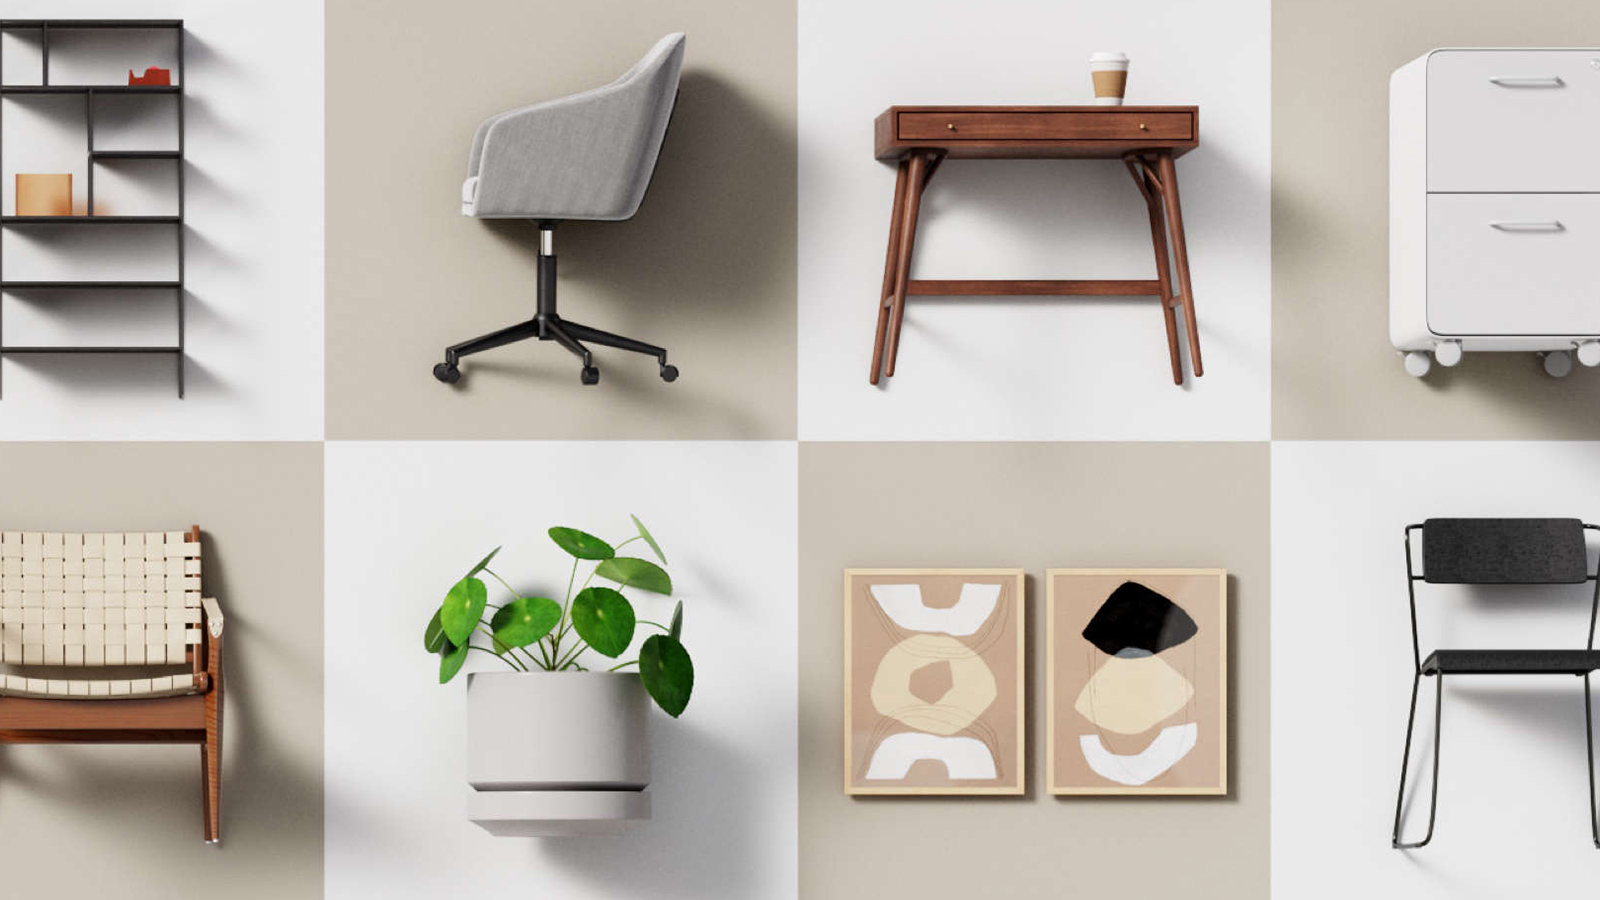 This image shows a collage of eight pieces of modern furniture and decor against a beige background.